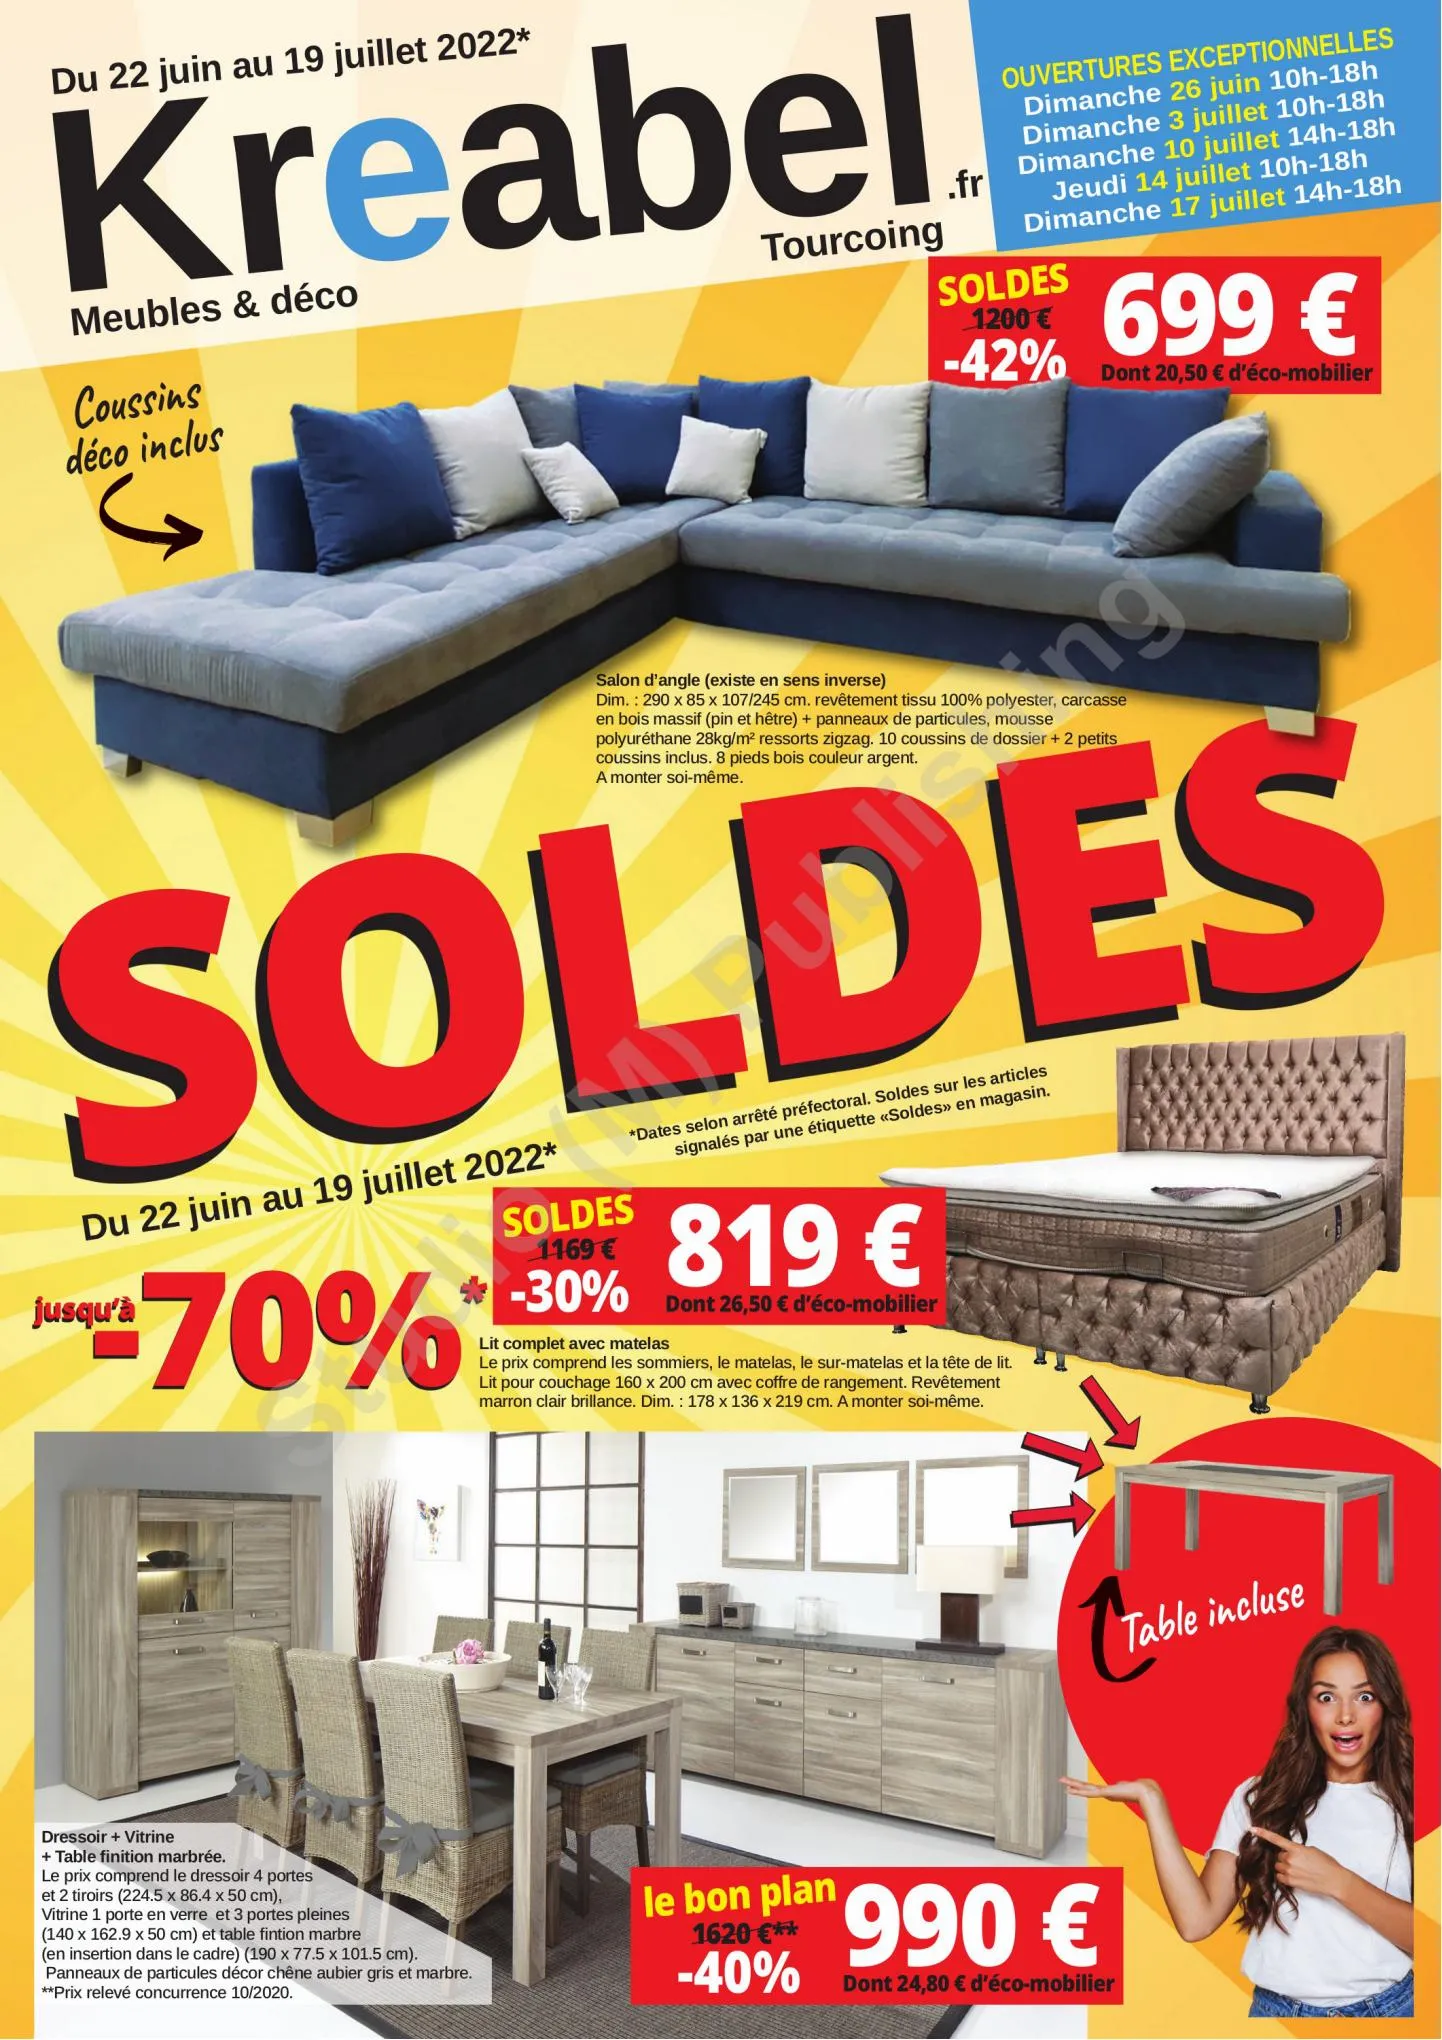 Catalogue Soldes Kreabel, page 00001